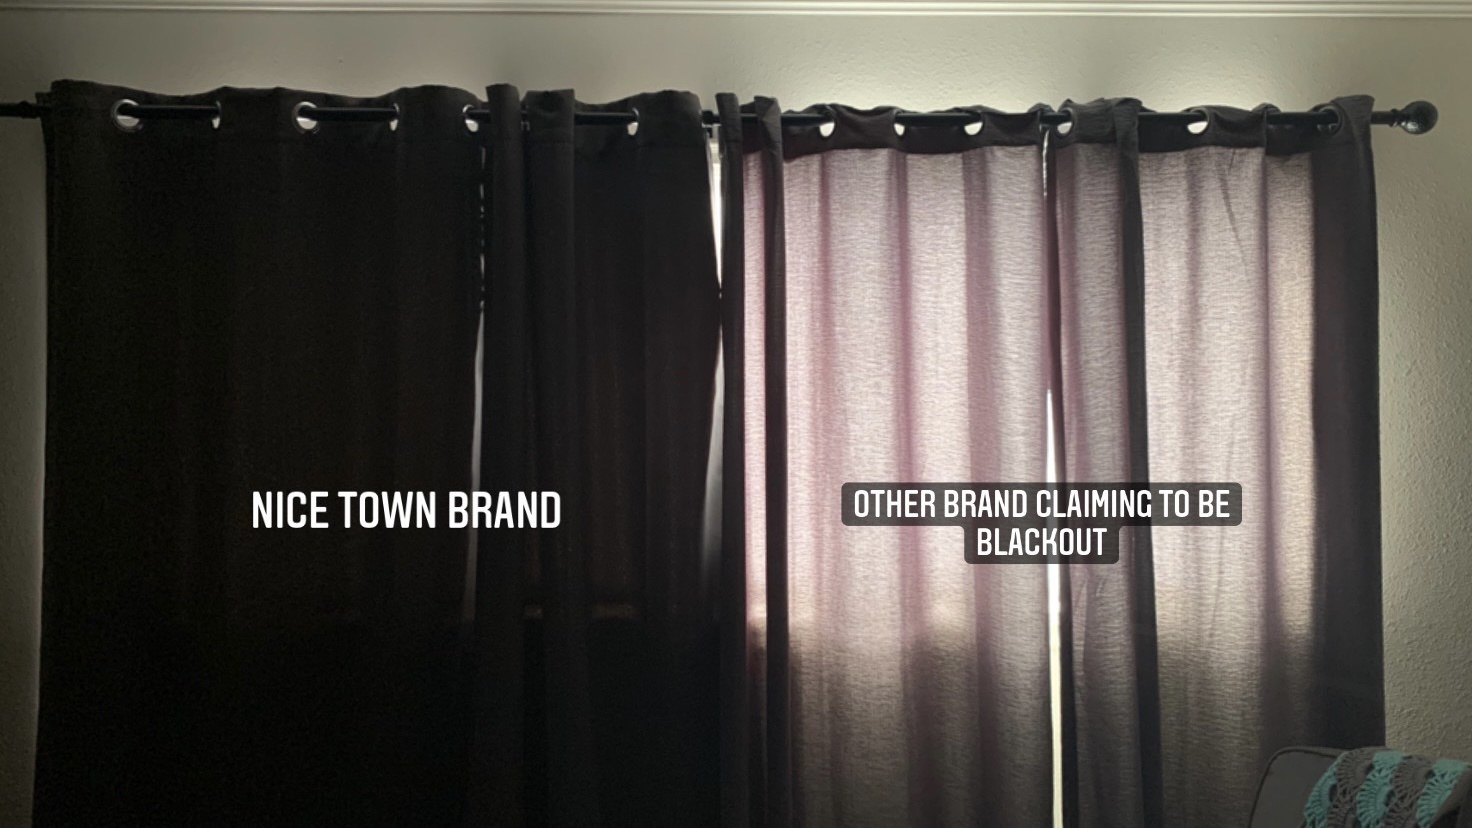 two curtains side by side with the nice town brand curtains blocking out almost all the light while the other brand claiming to be blackout curtains lets in a lot of light and looks sheer